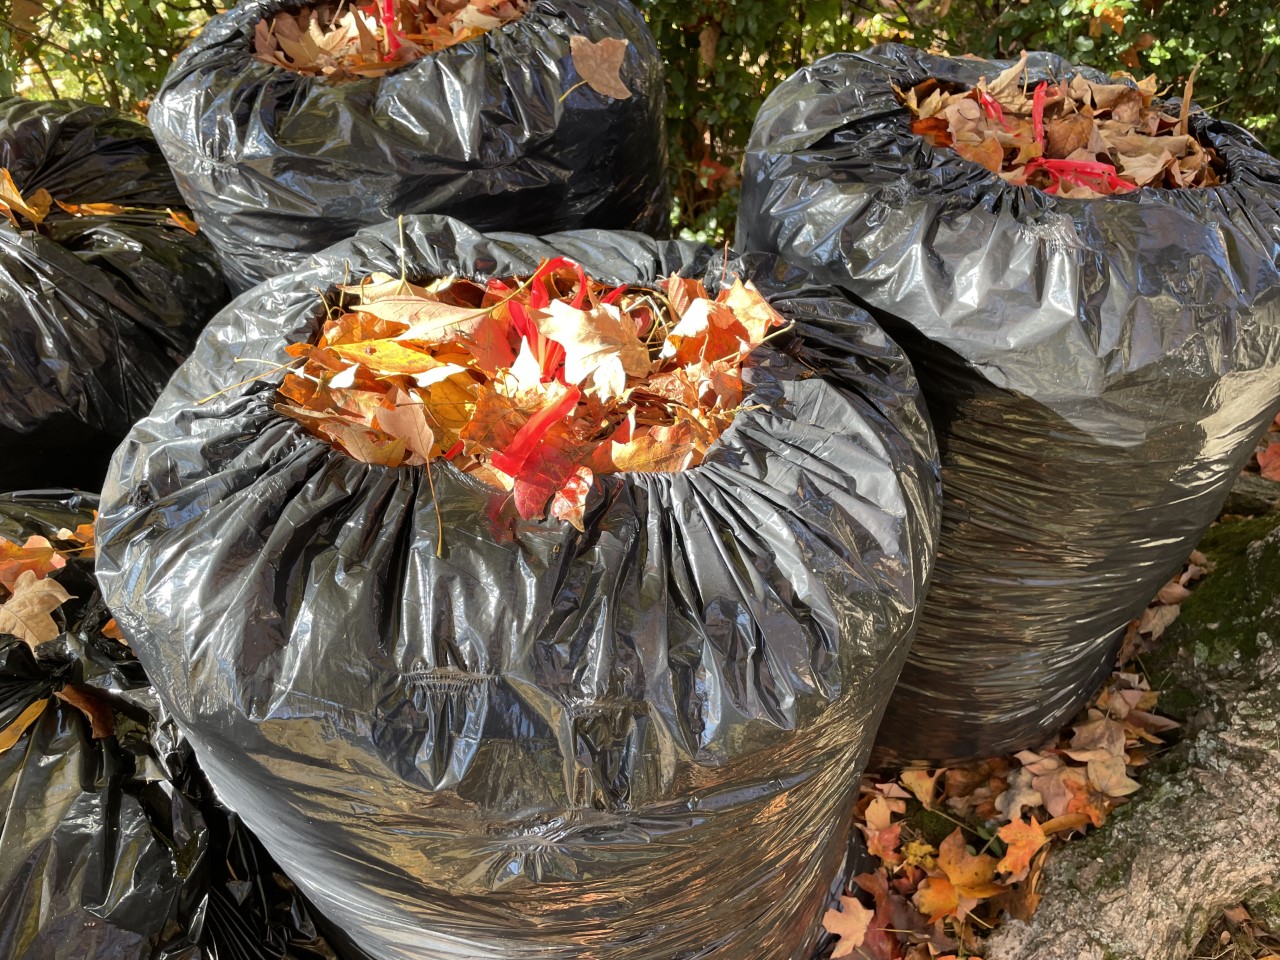 Plastic Bags Not Accepted for Curbside Yard Waste Beginning March 1, News